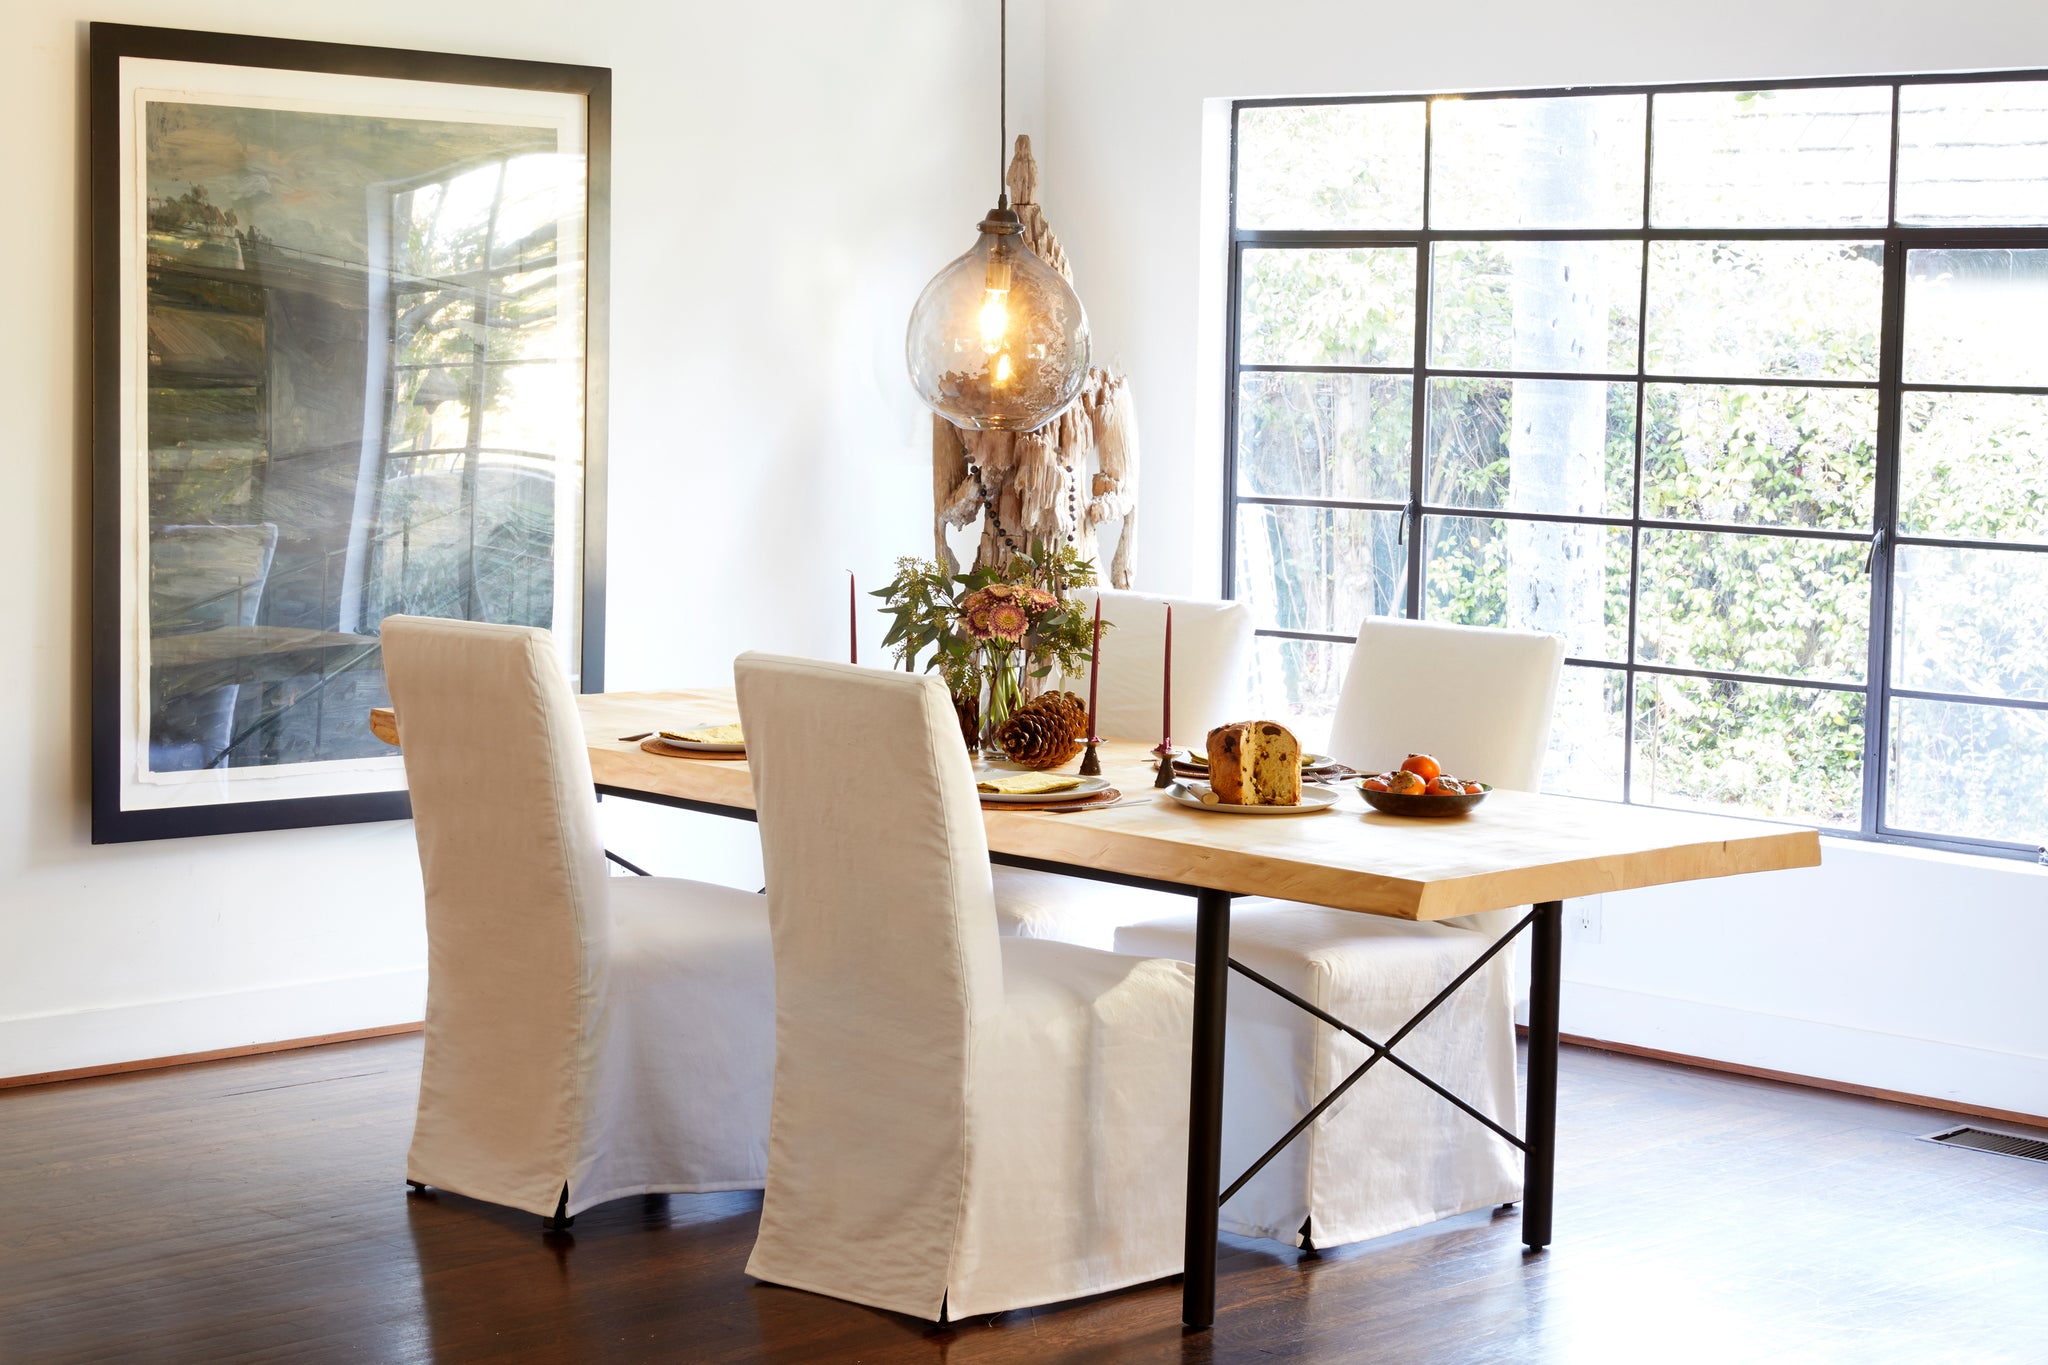  Parsons dining table in Denim White next to a wood dining table. In the background is a white room with a large picture frame and glass window. Above the chairs hangs a jug lamp. Photographed in Denim White. 